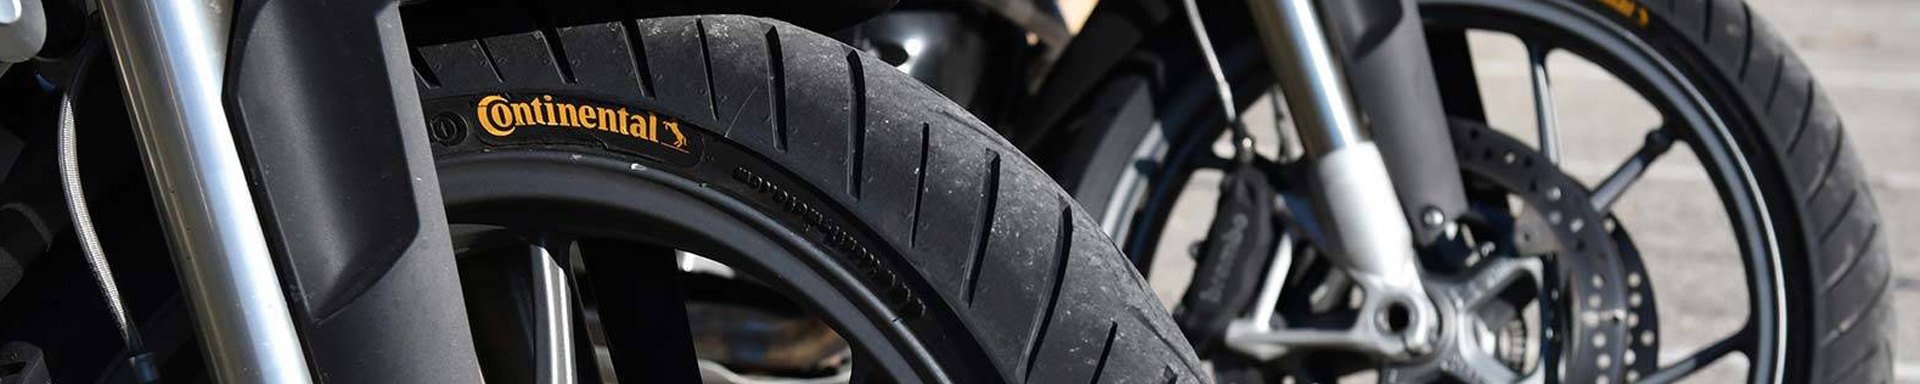 Universal Continental Motorcycle Tires